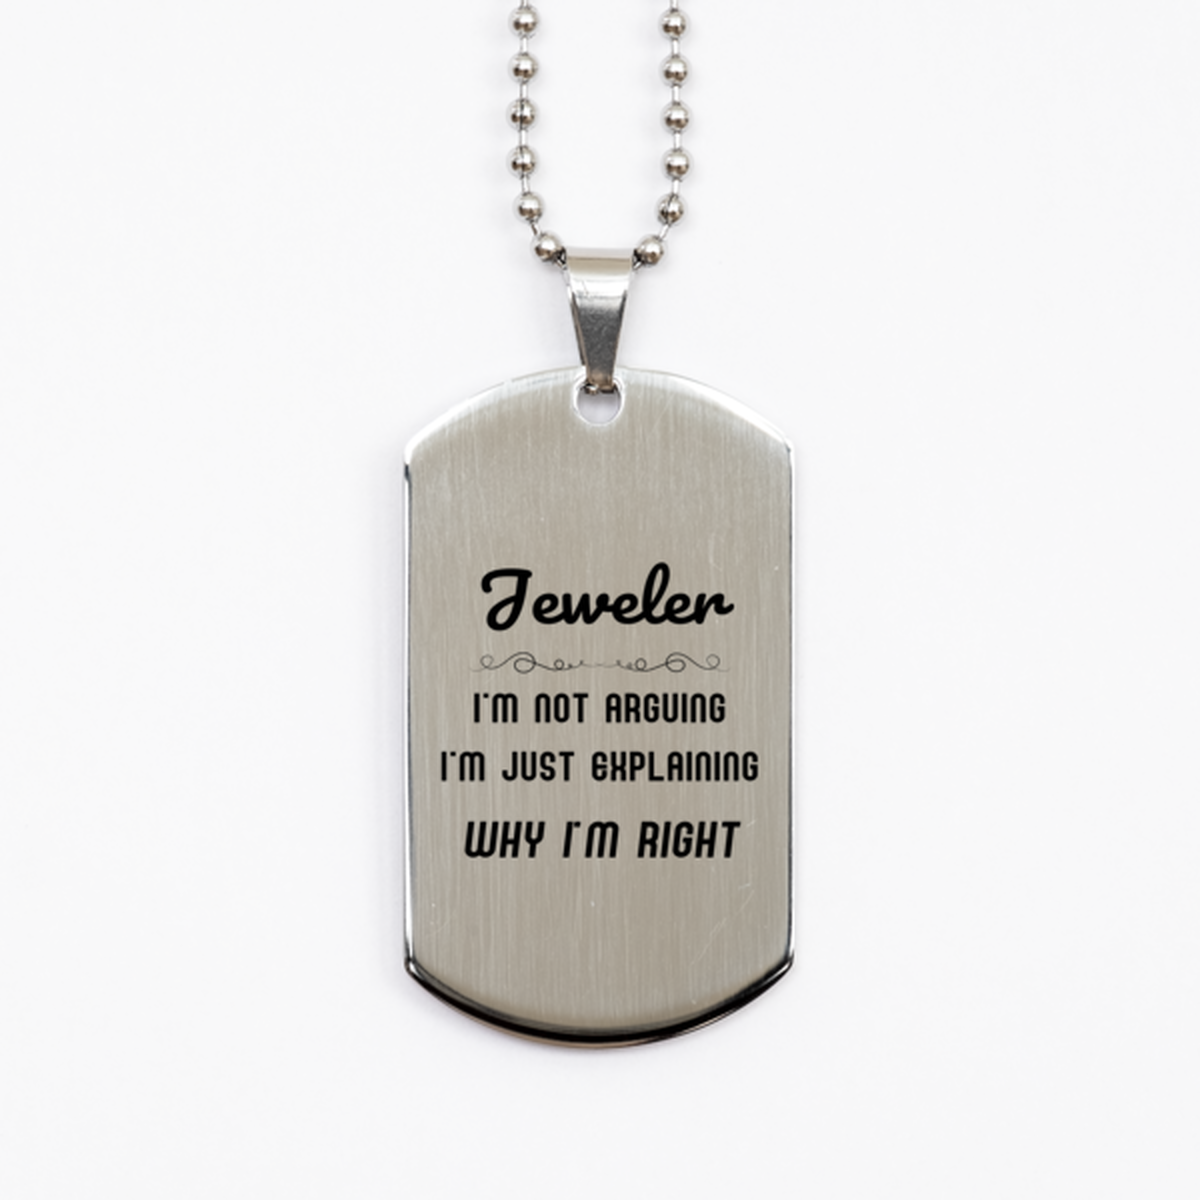 Jeweler I'm not Arguing. I'm Just Explaining Why I'm RIGHT Silver Dog Tag, Funny Saying Quote Jeweler Gifts For Jeweler Graduation Birthday Christmas Gifts for Men Women Coworker